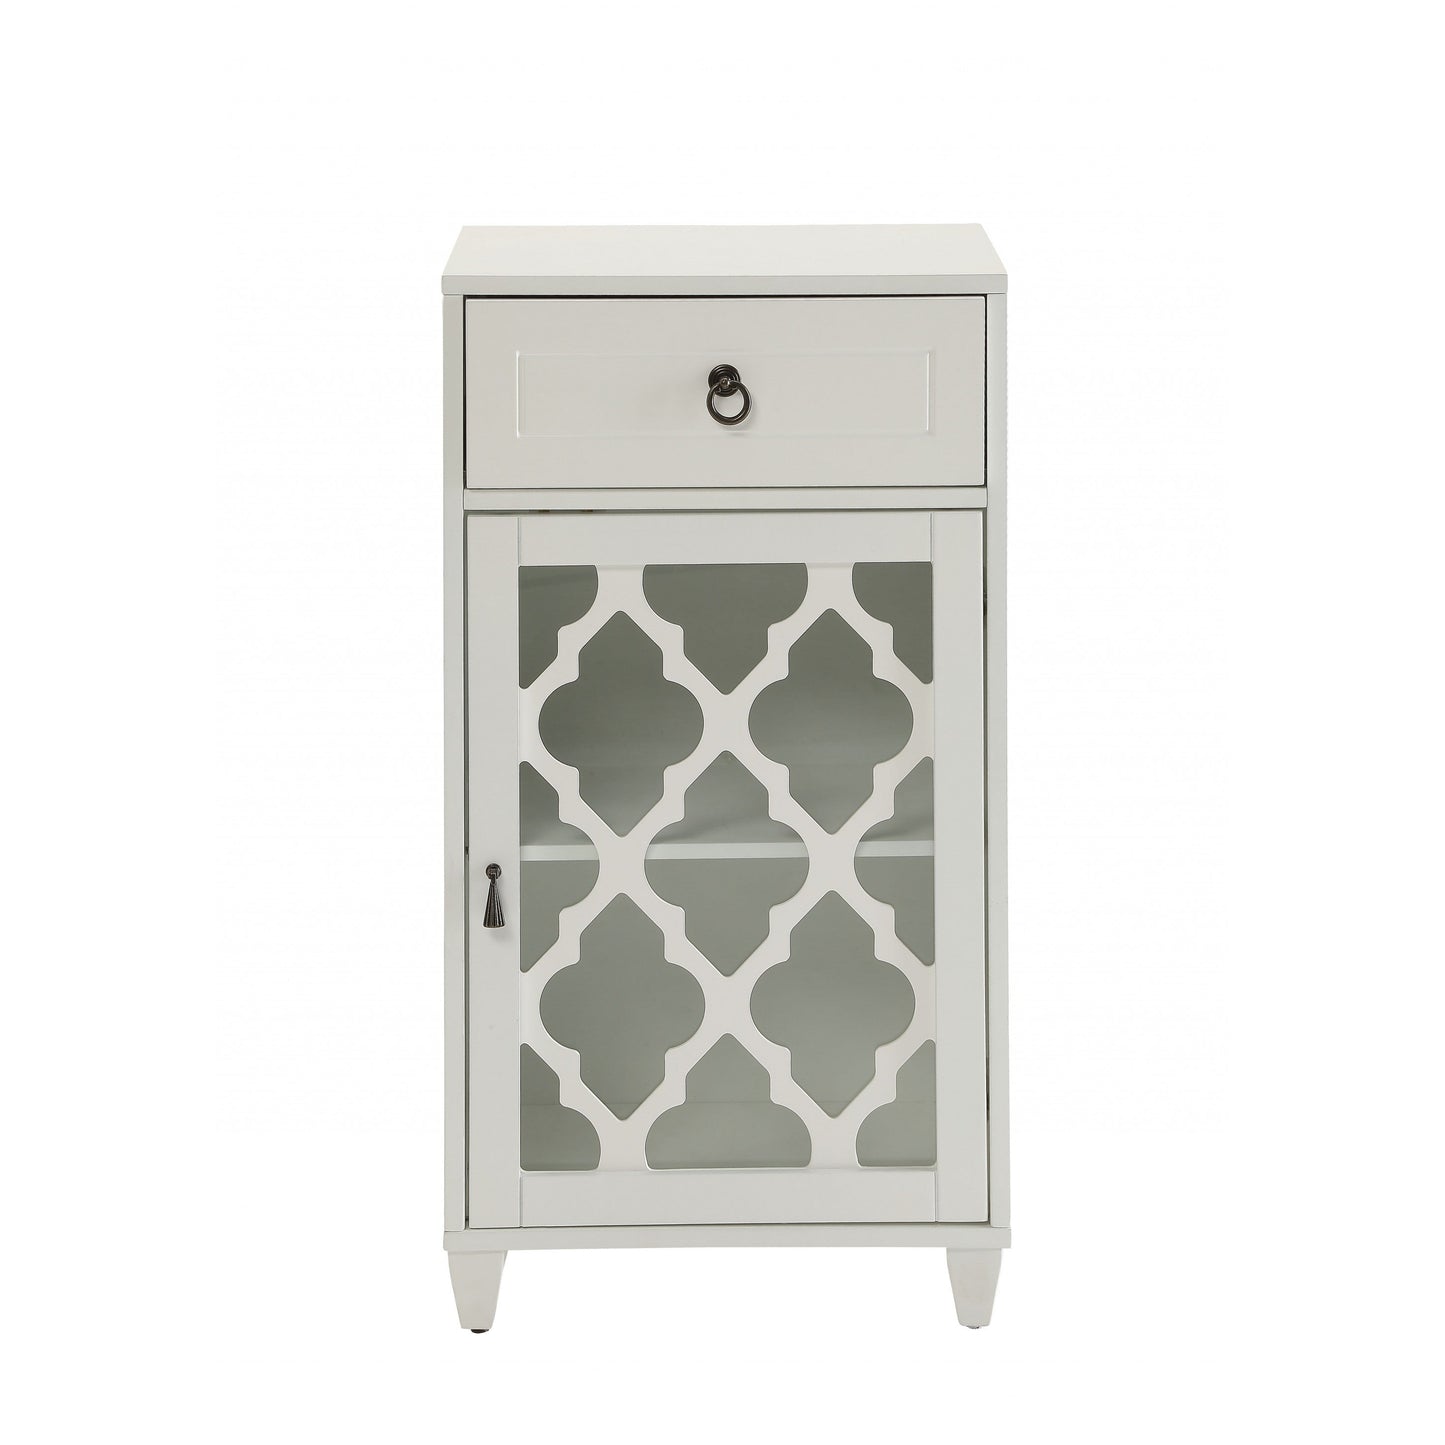 HomeRoots Fret Work Design Cabinet With Glass Door In White Finish